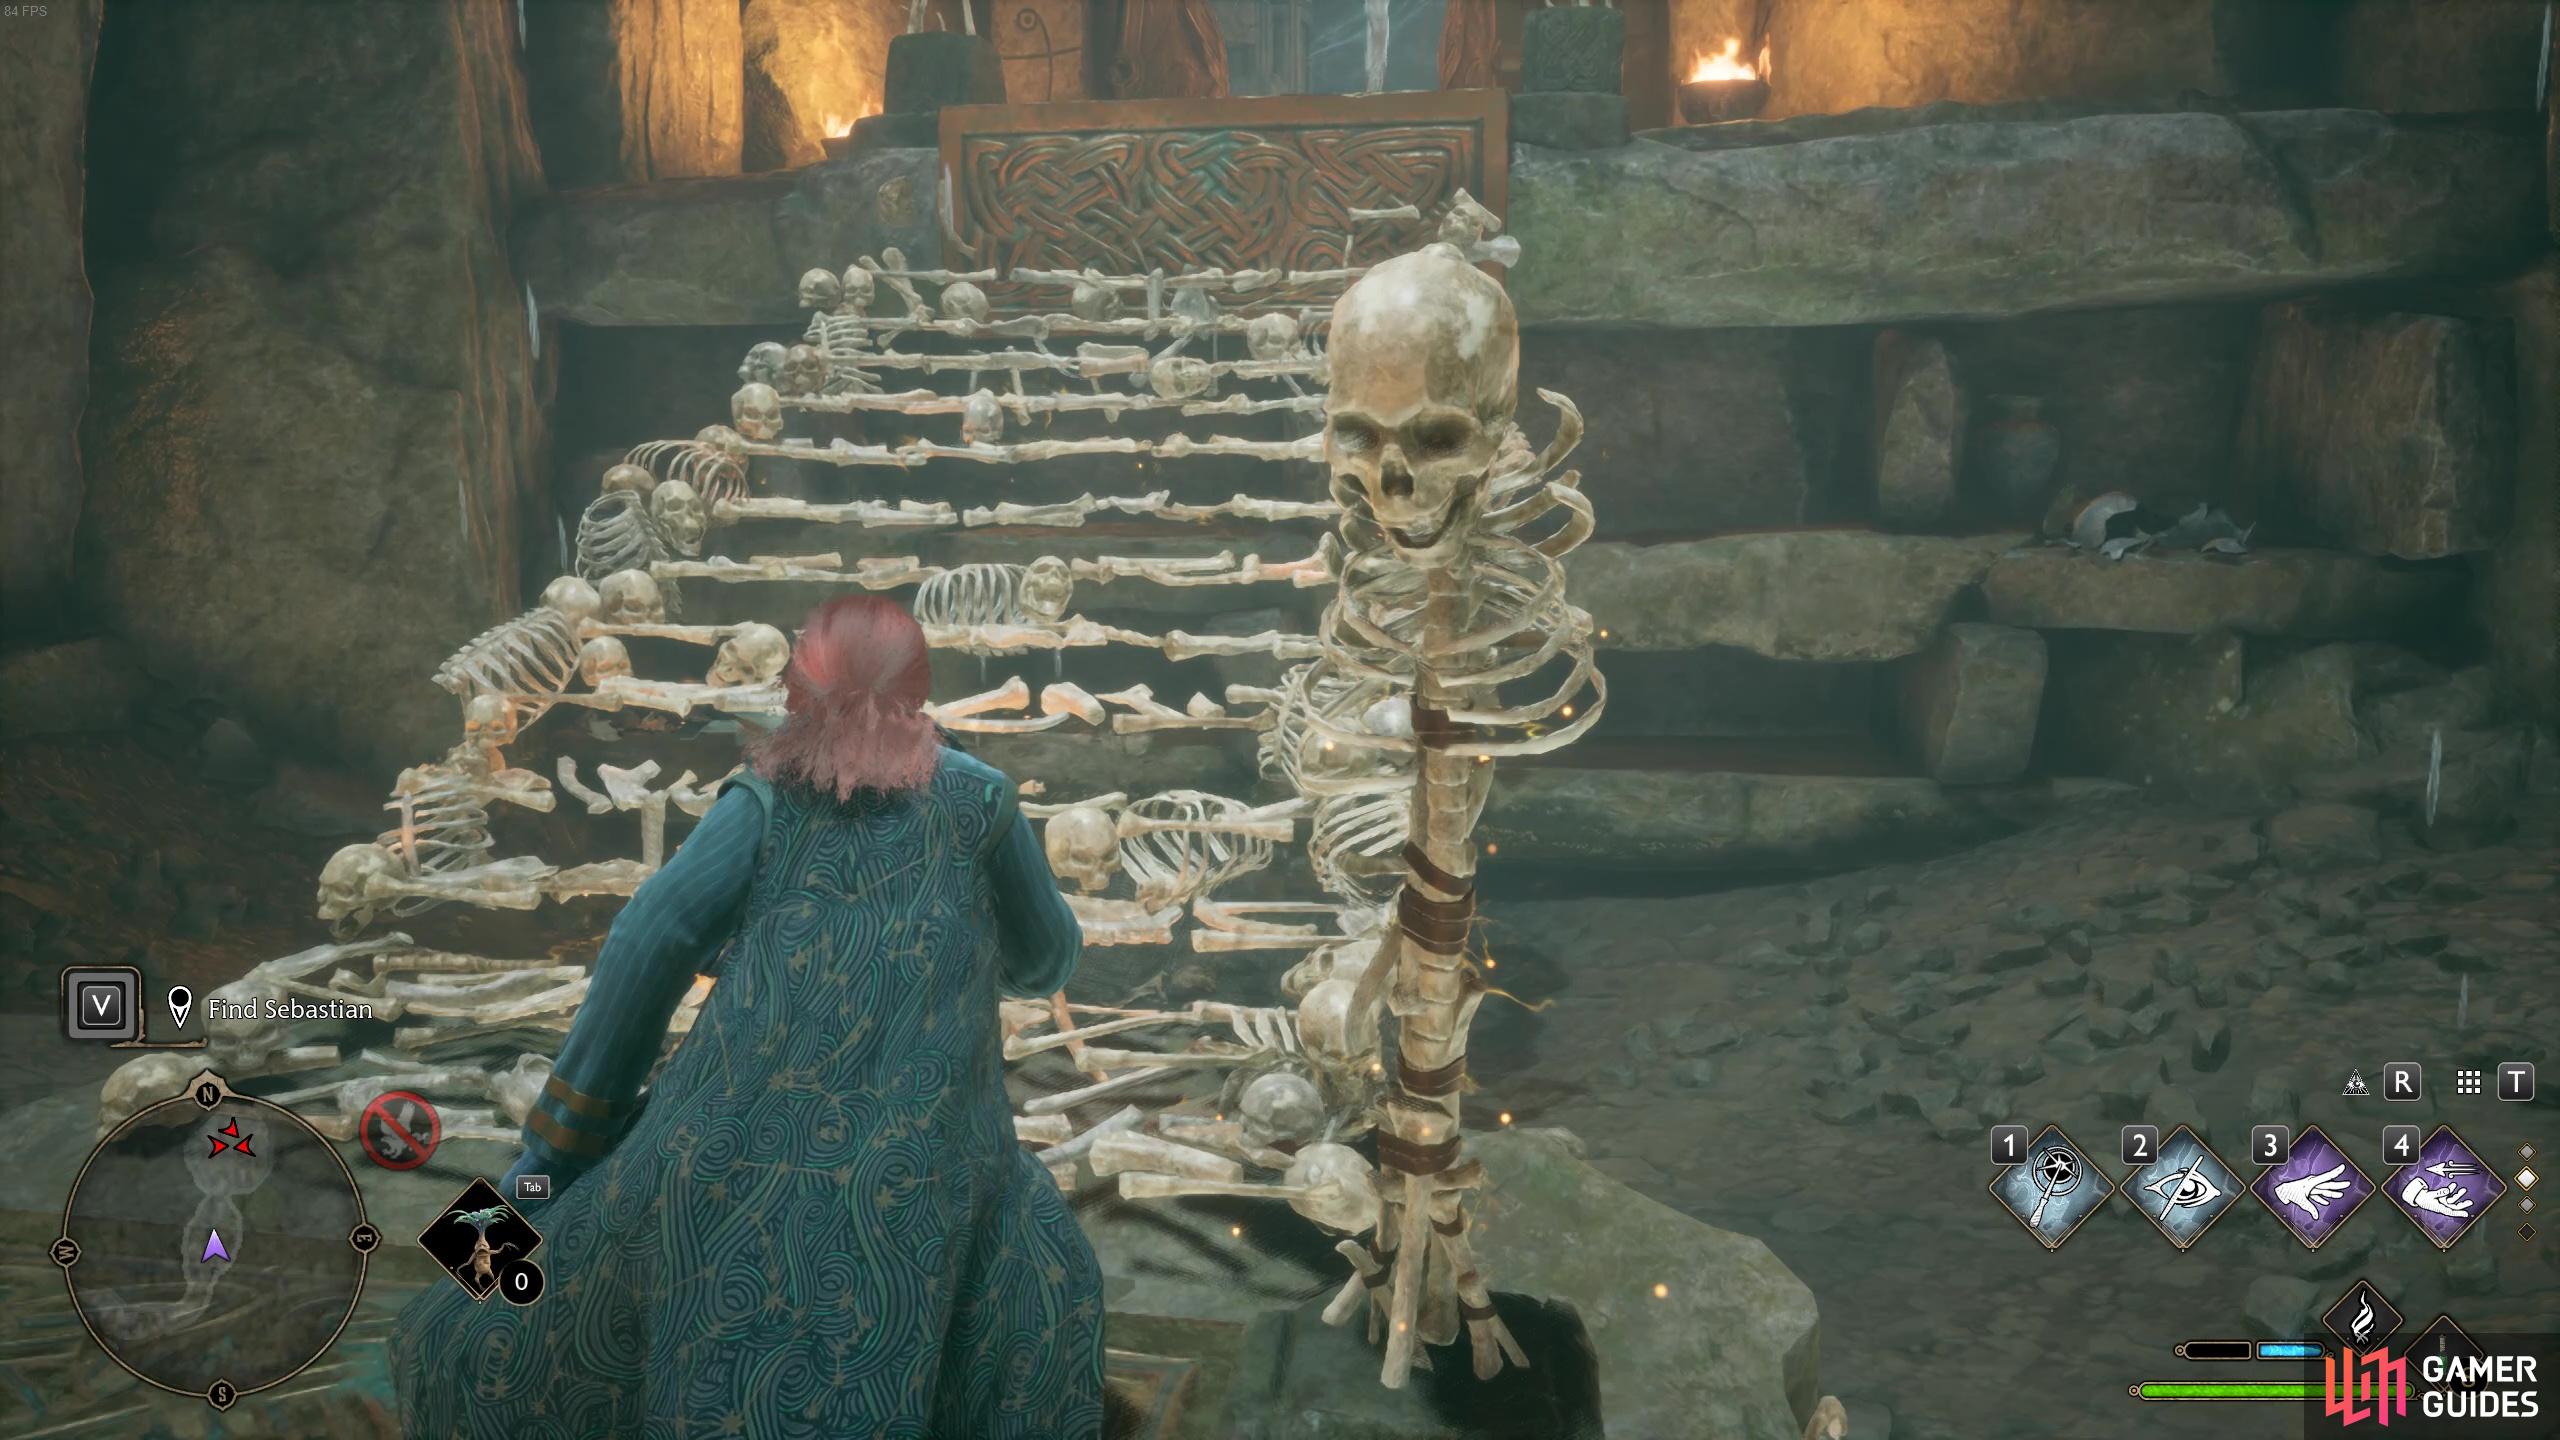 Use the skeletons in the tombs to make a set of stairs up to the room where you'll find Sebastian. 